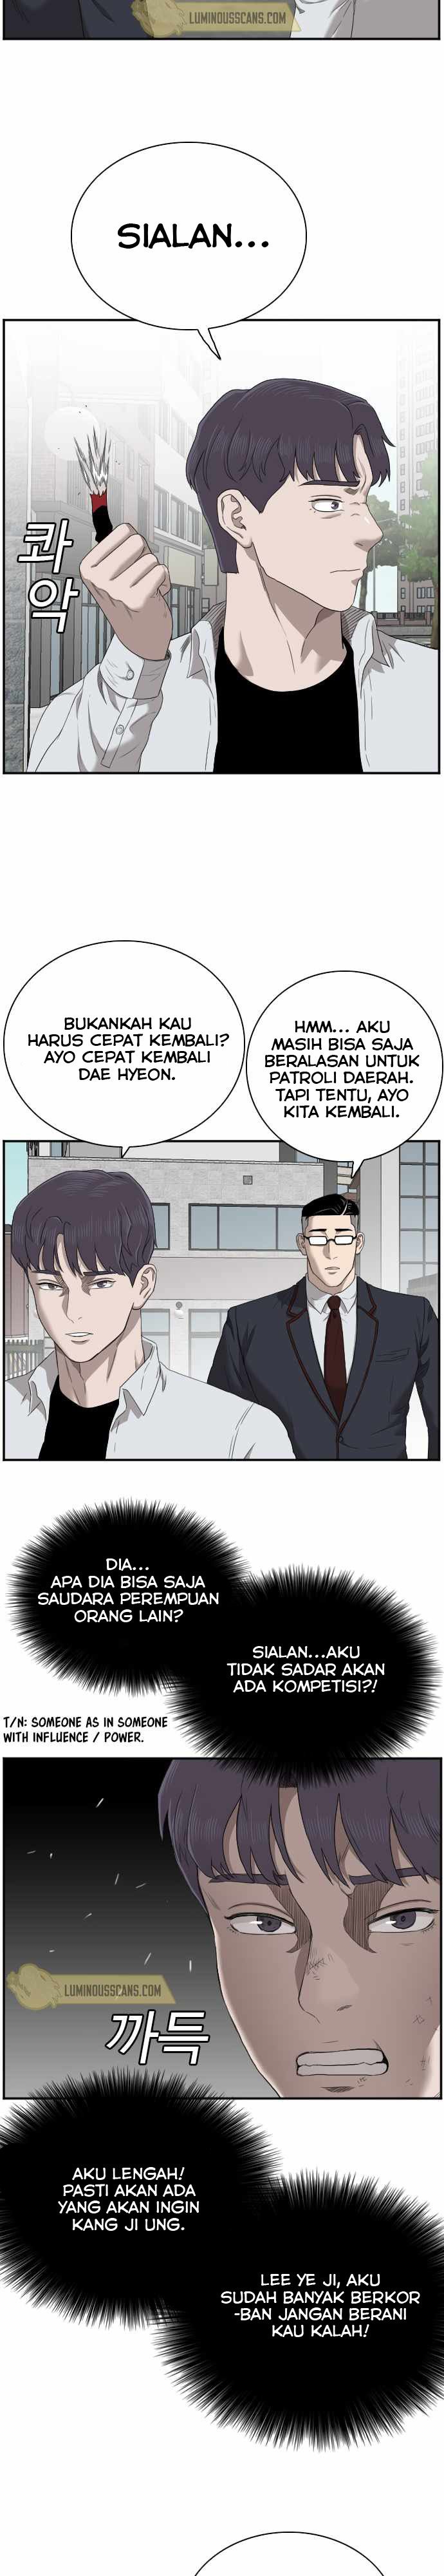 A Bad Person Chapter 52